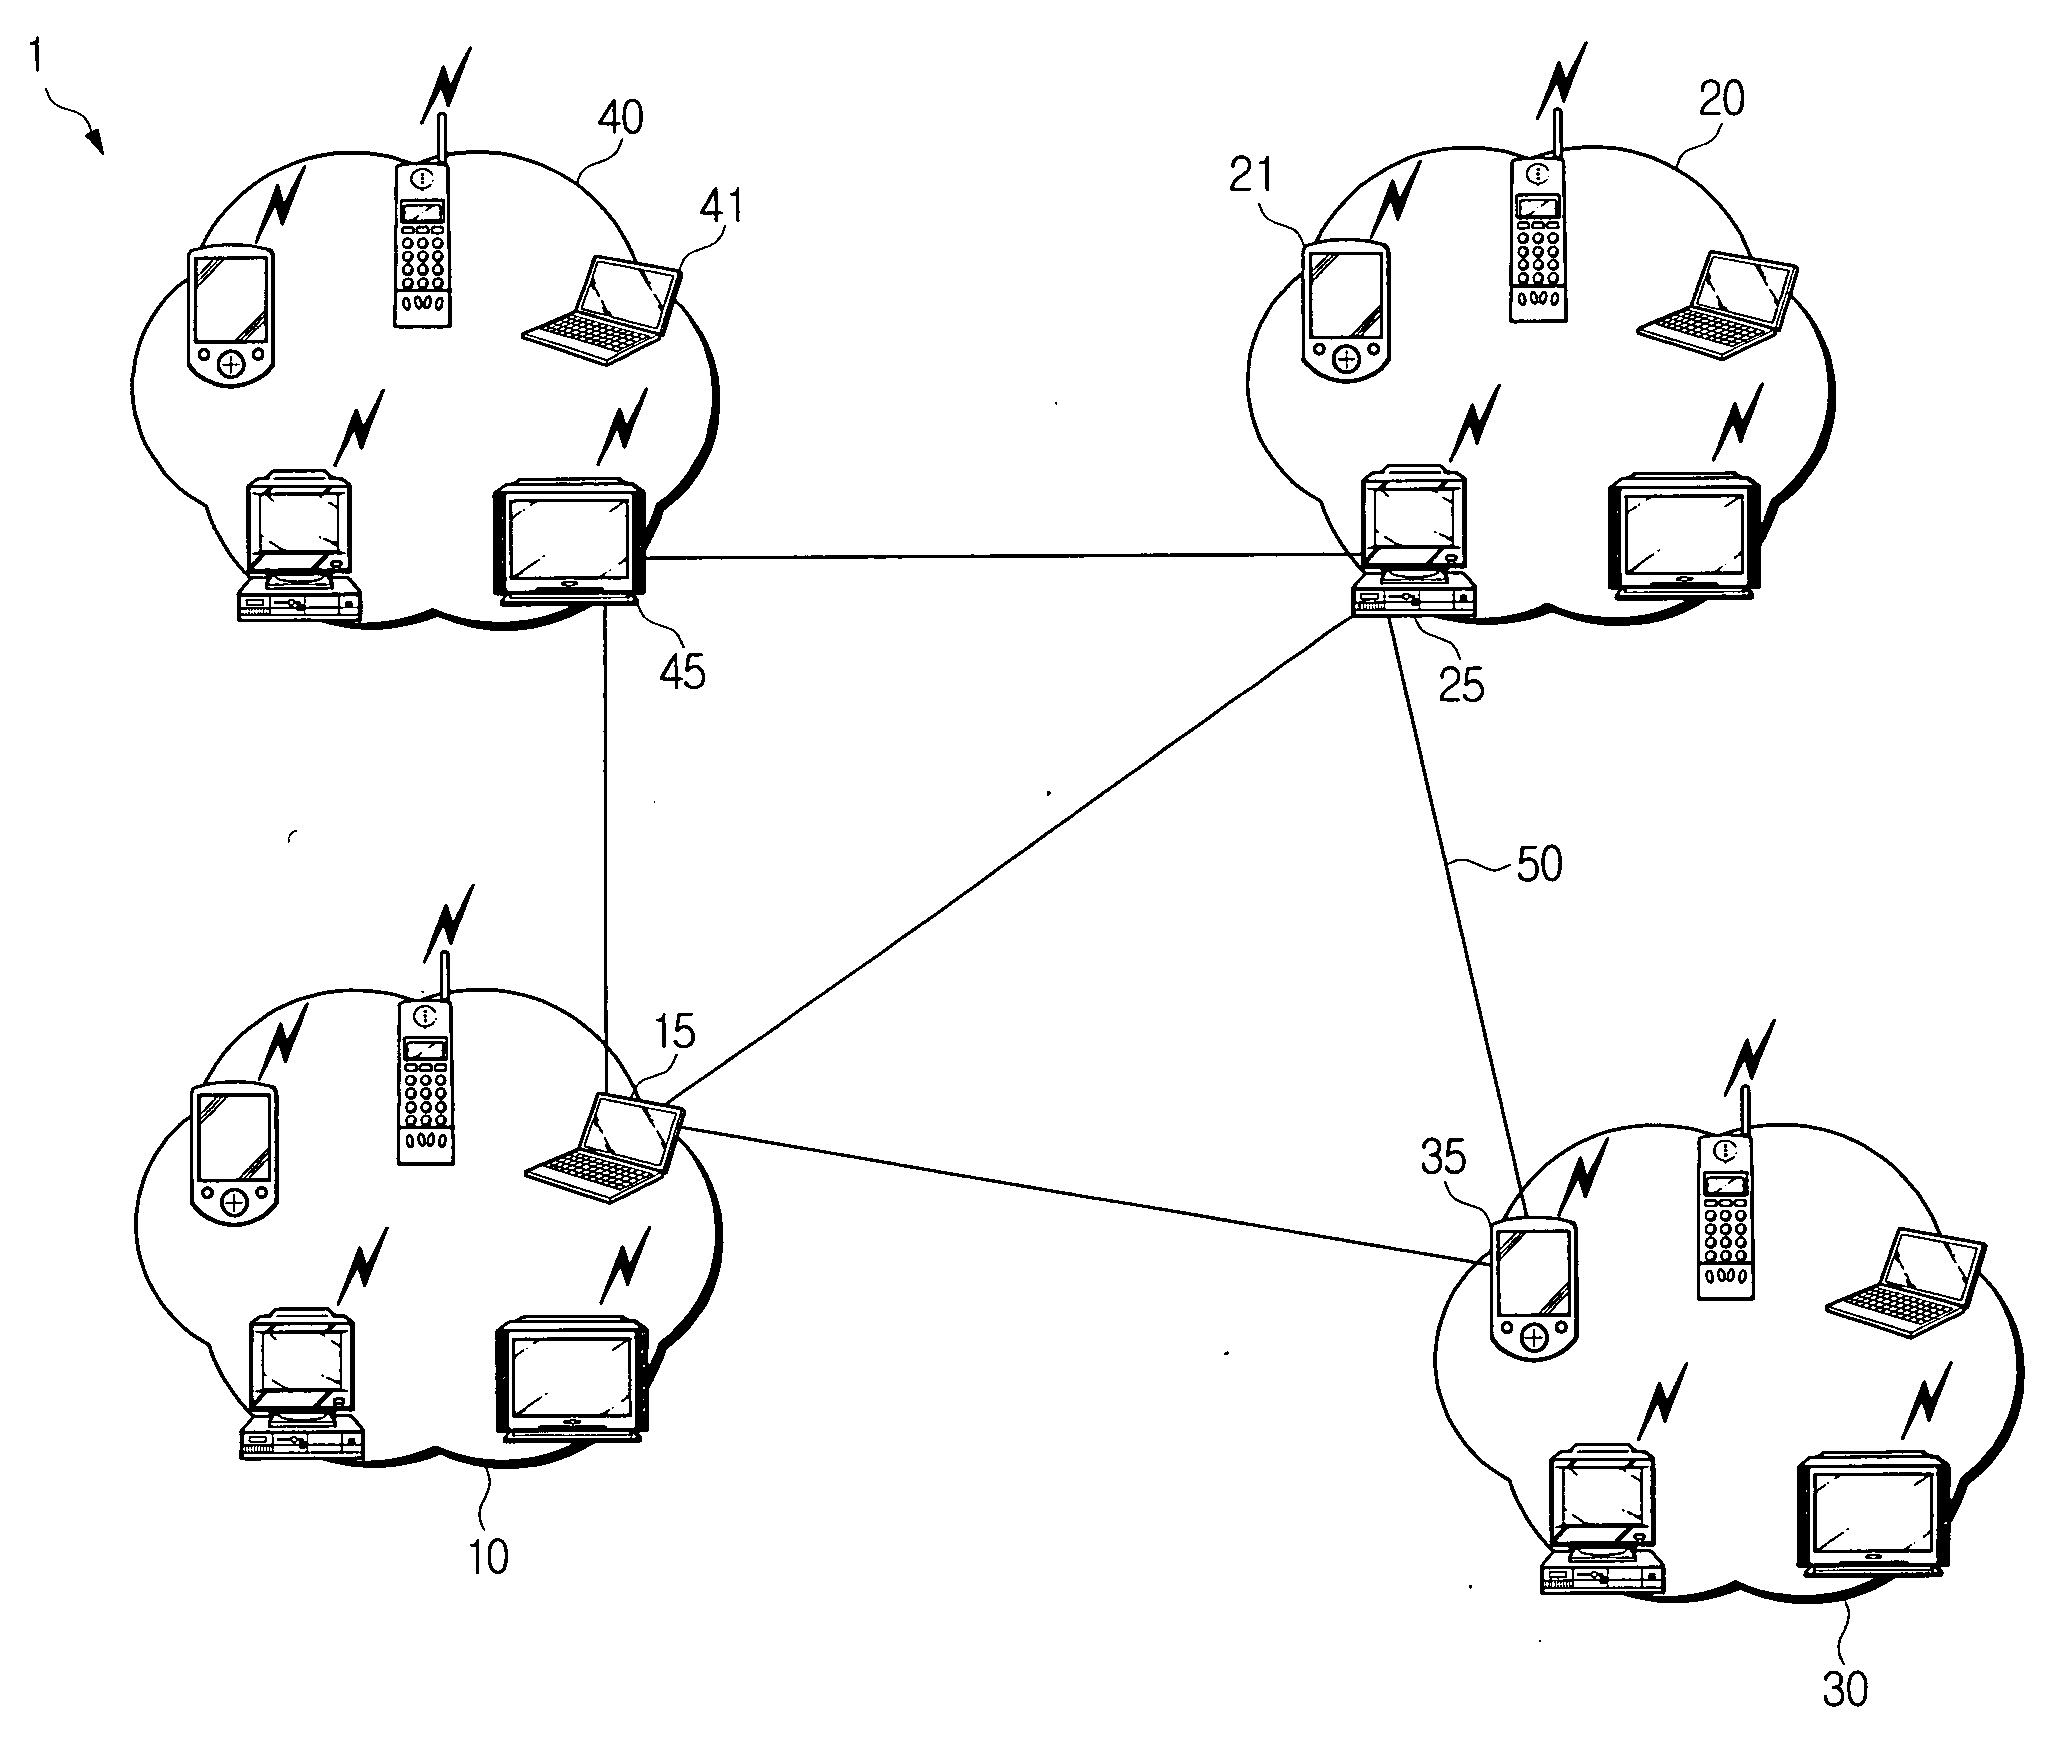 Method of establishing network topology capable of carrying out relay transmission among subnetworks in backbone network